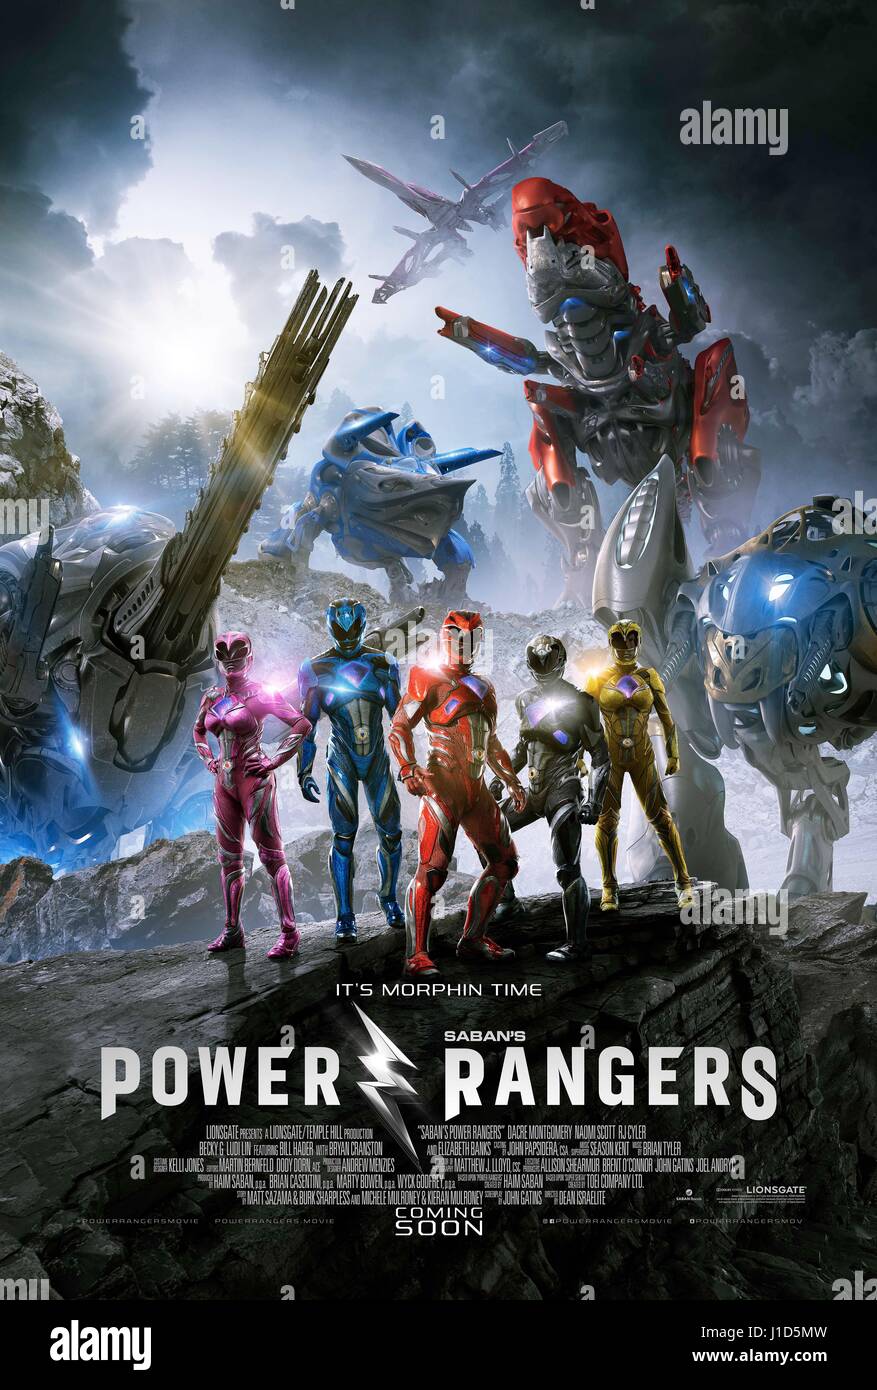 RELEASE DATE: March 24, 2017 TITLE: Power Rangers STUDIO: Lionsgate DIRECTOR: Dean Israelite PLOT: A group of high-school kids, who are infused with unique superpowers, harness their abilities in order to save the world STARRING: Poster Art - Becky G., Ludi Lin, Dacre Montgomery, Naomi Scott, Rj Cyler. (Credit: © Lionsgate/Entertainment Pictures) Stock Photo